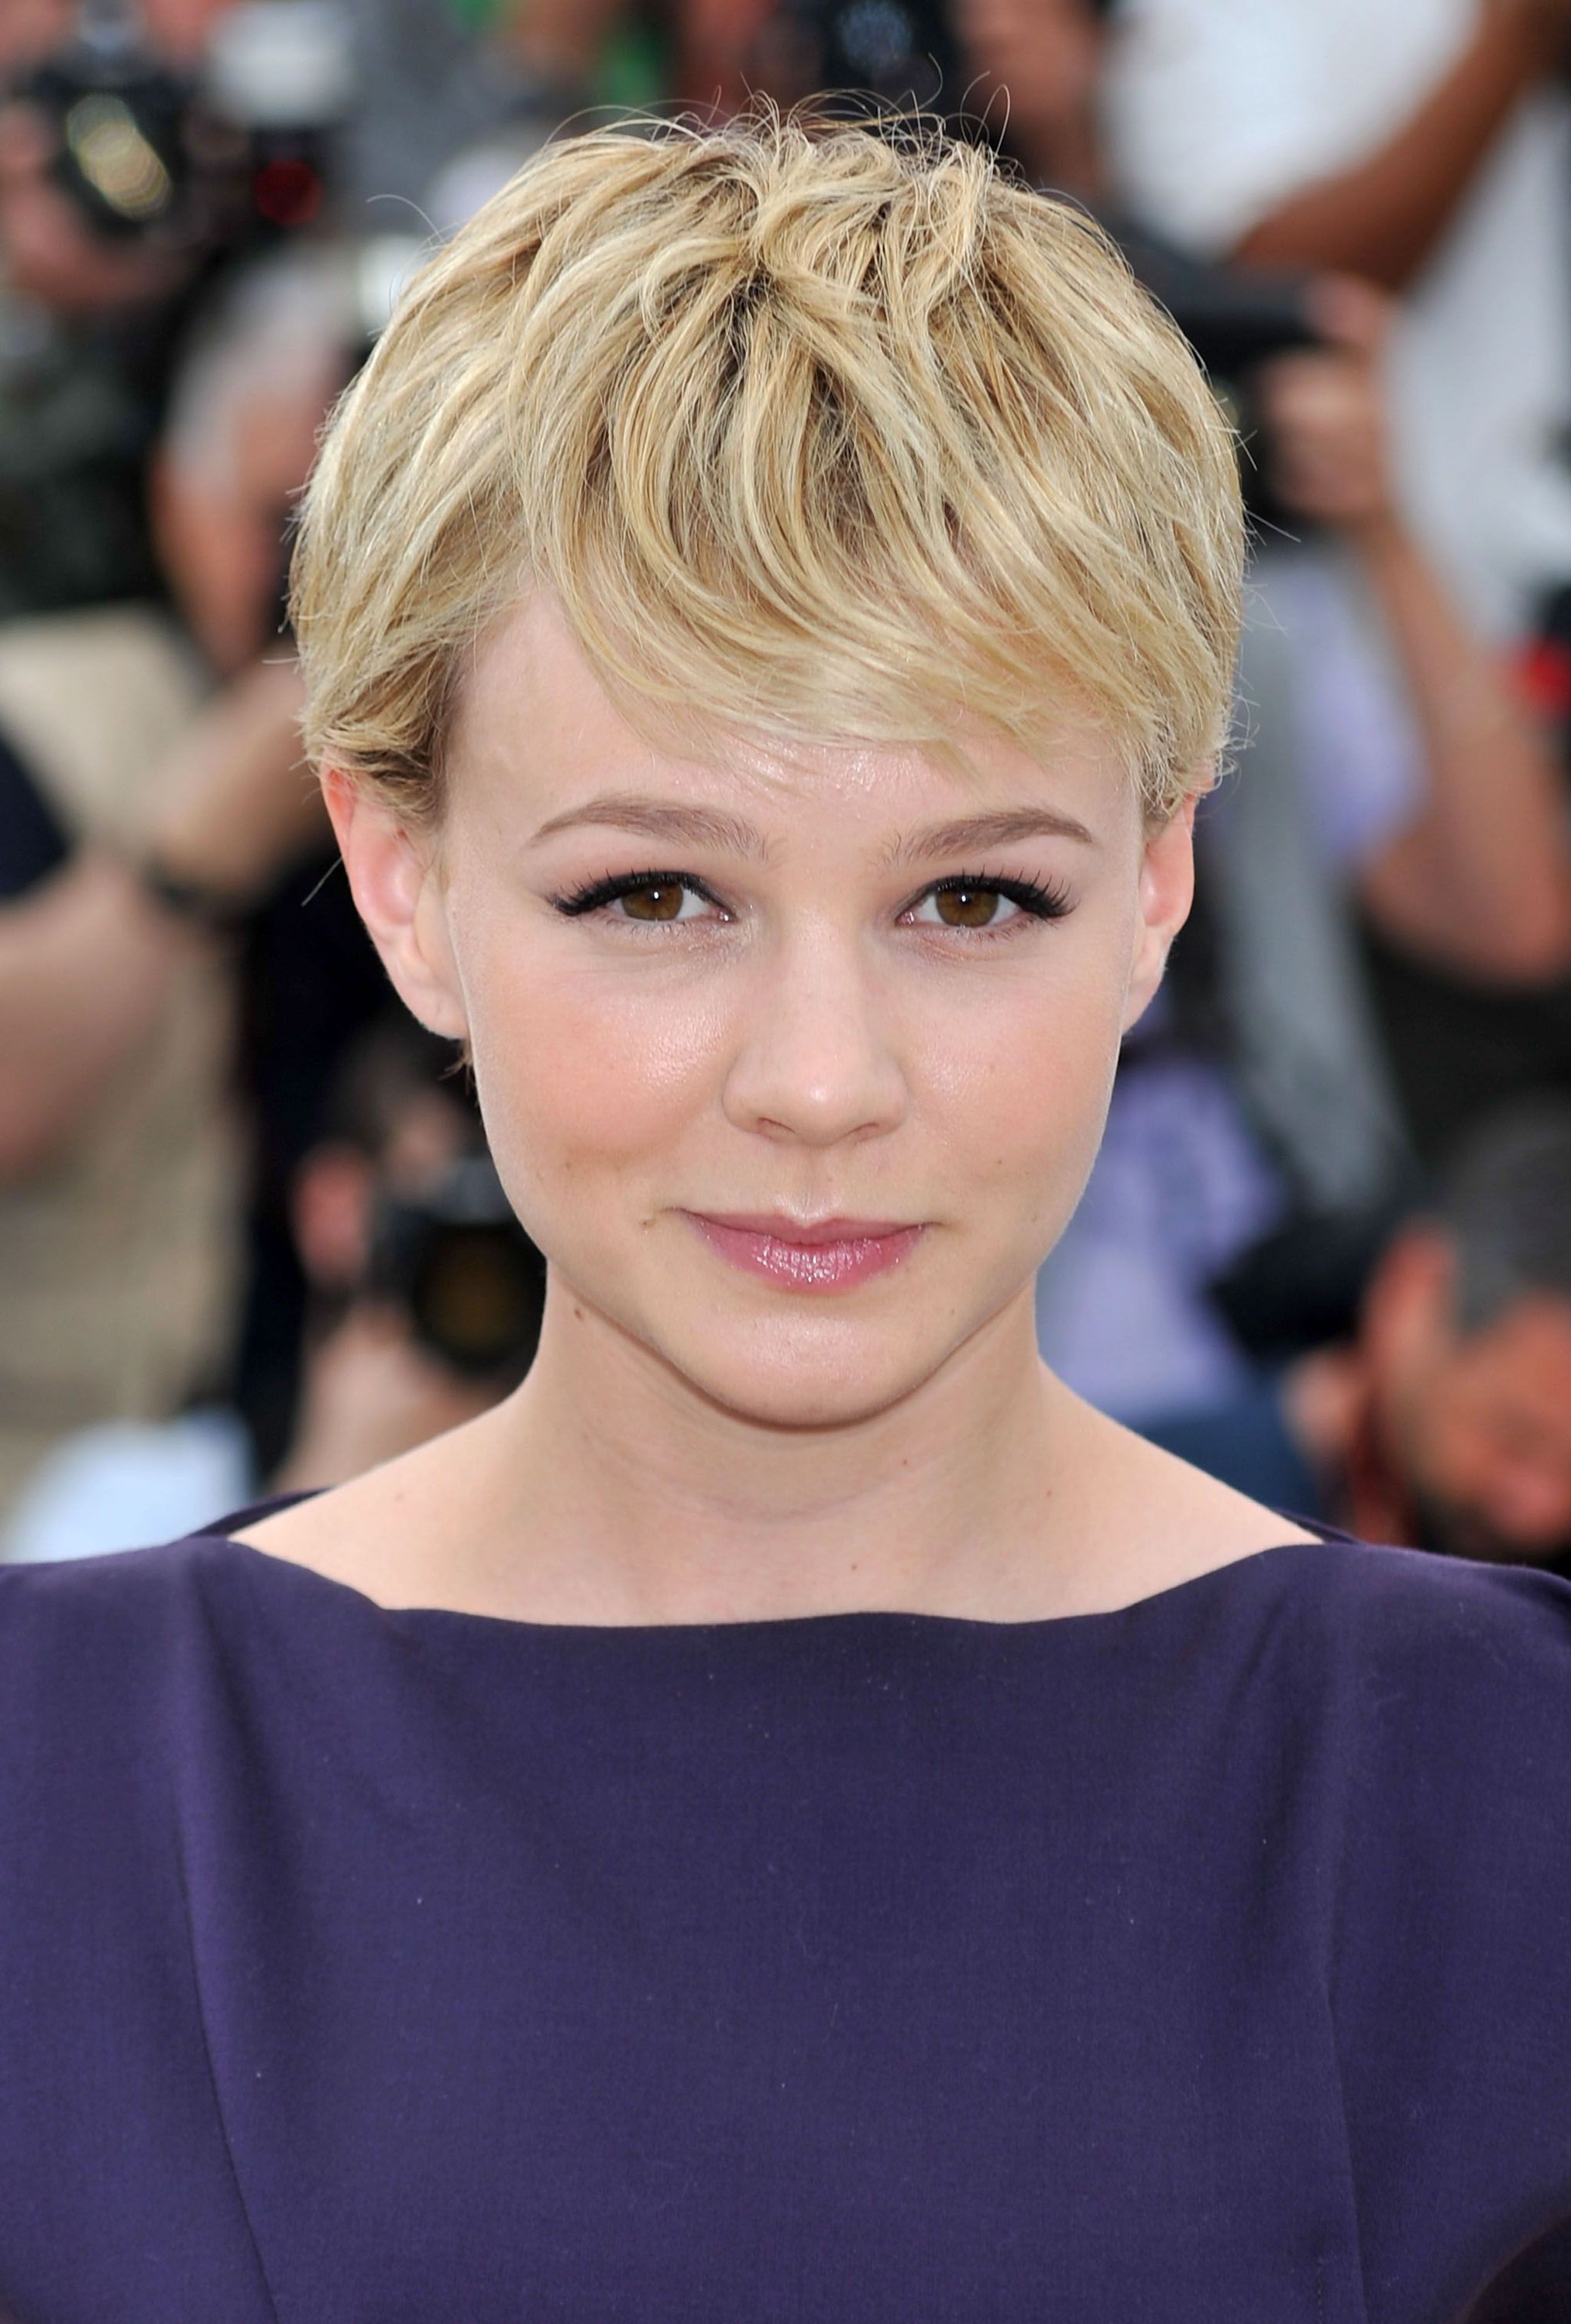 The 65 Best Short Hairstyles And Haircuts To Try Now | Other Within Posh Spice Short Hairstyles (View 14 of 25)